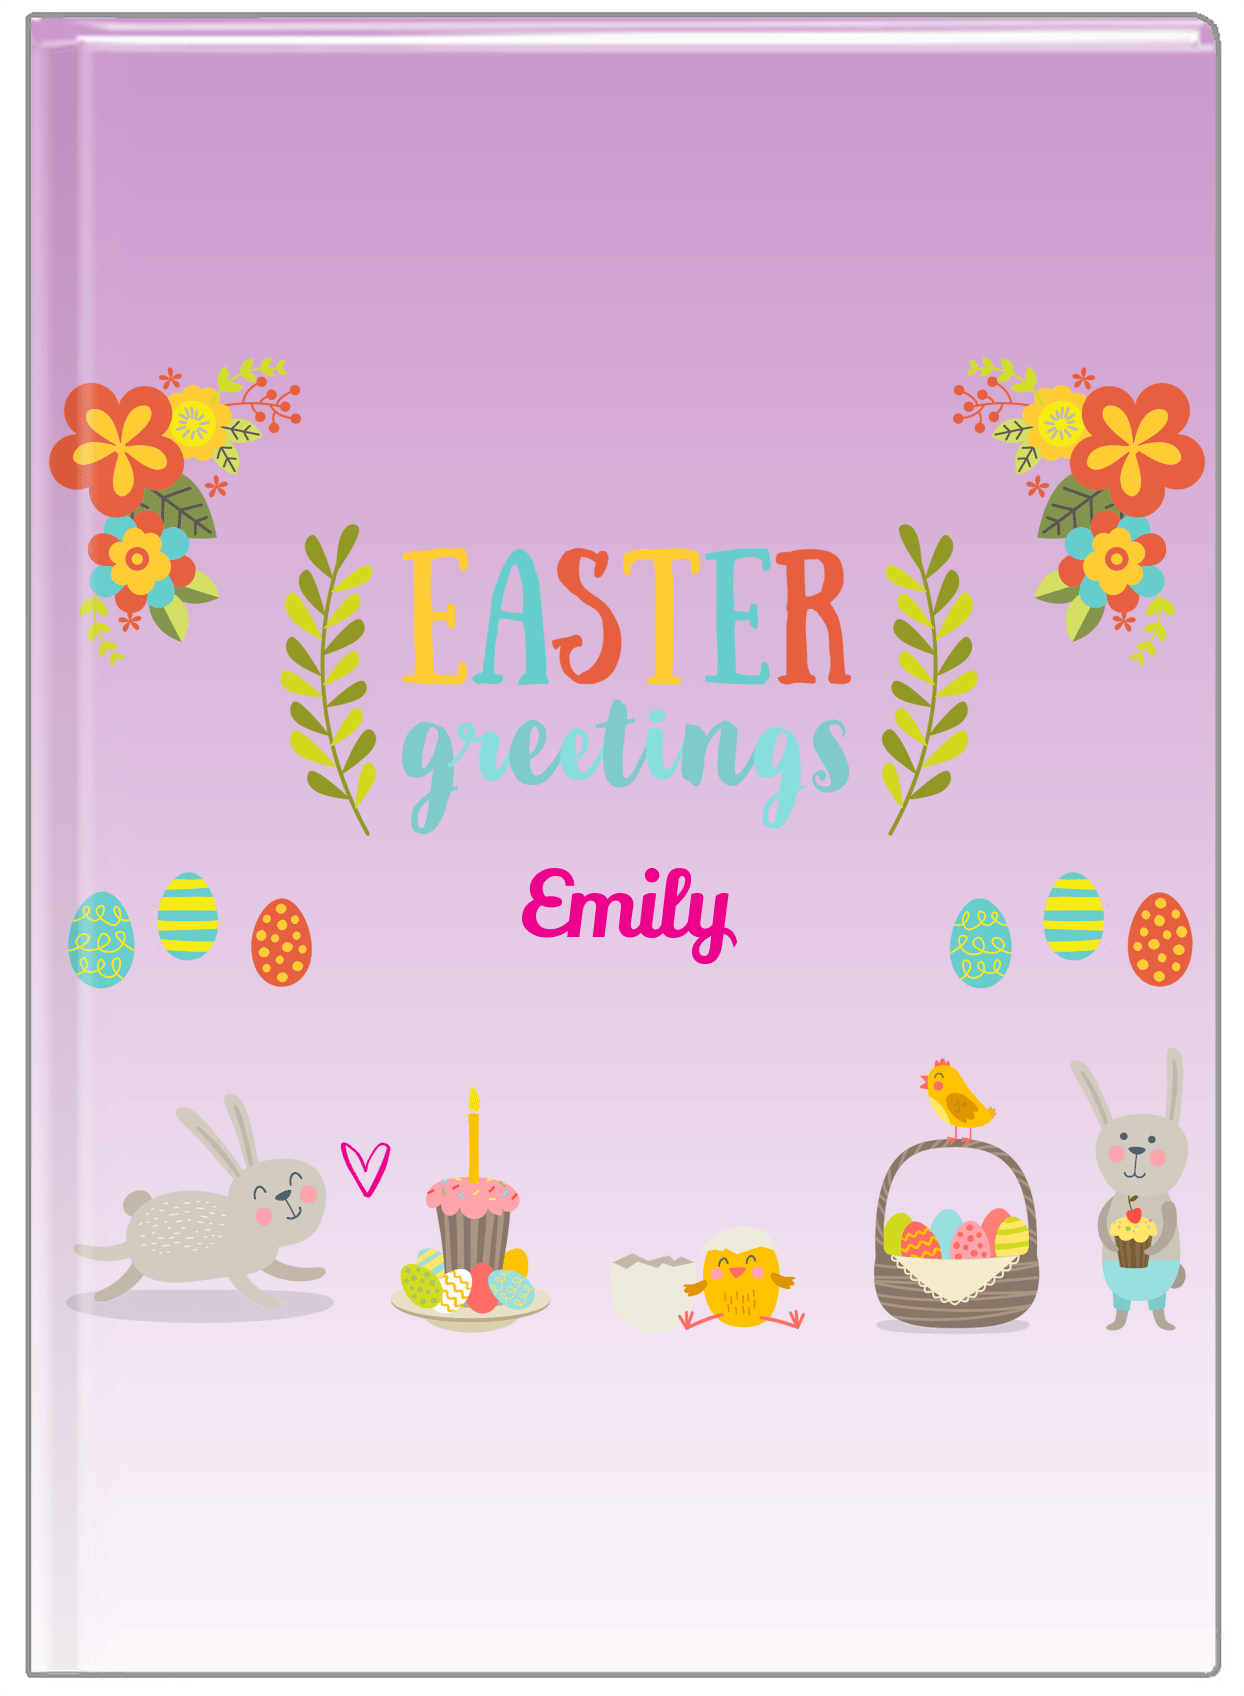 Personalized Easter Journal X - Easter Greetings - Purple Background - Front View